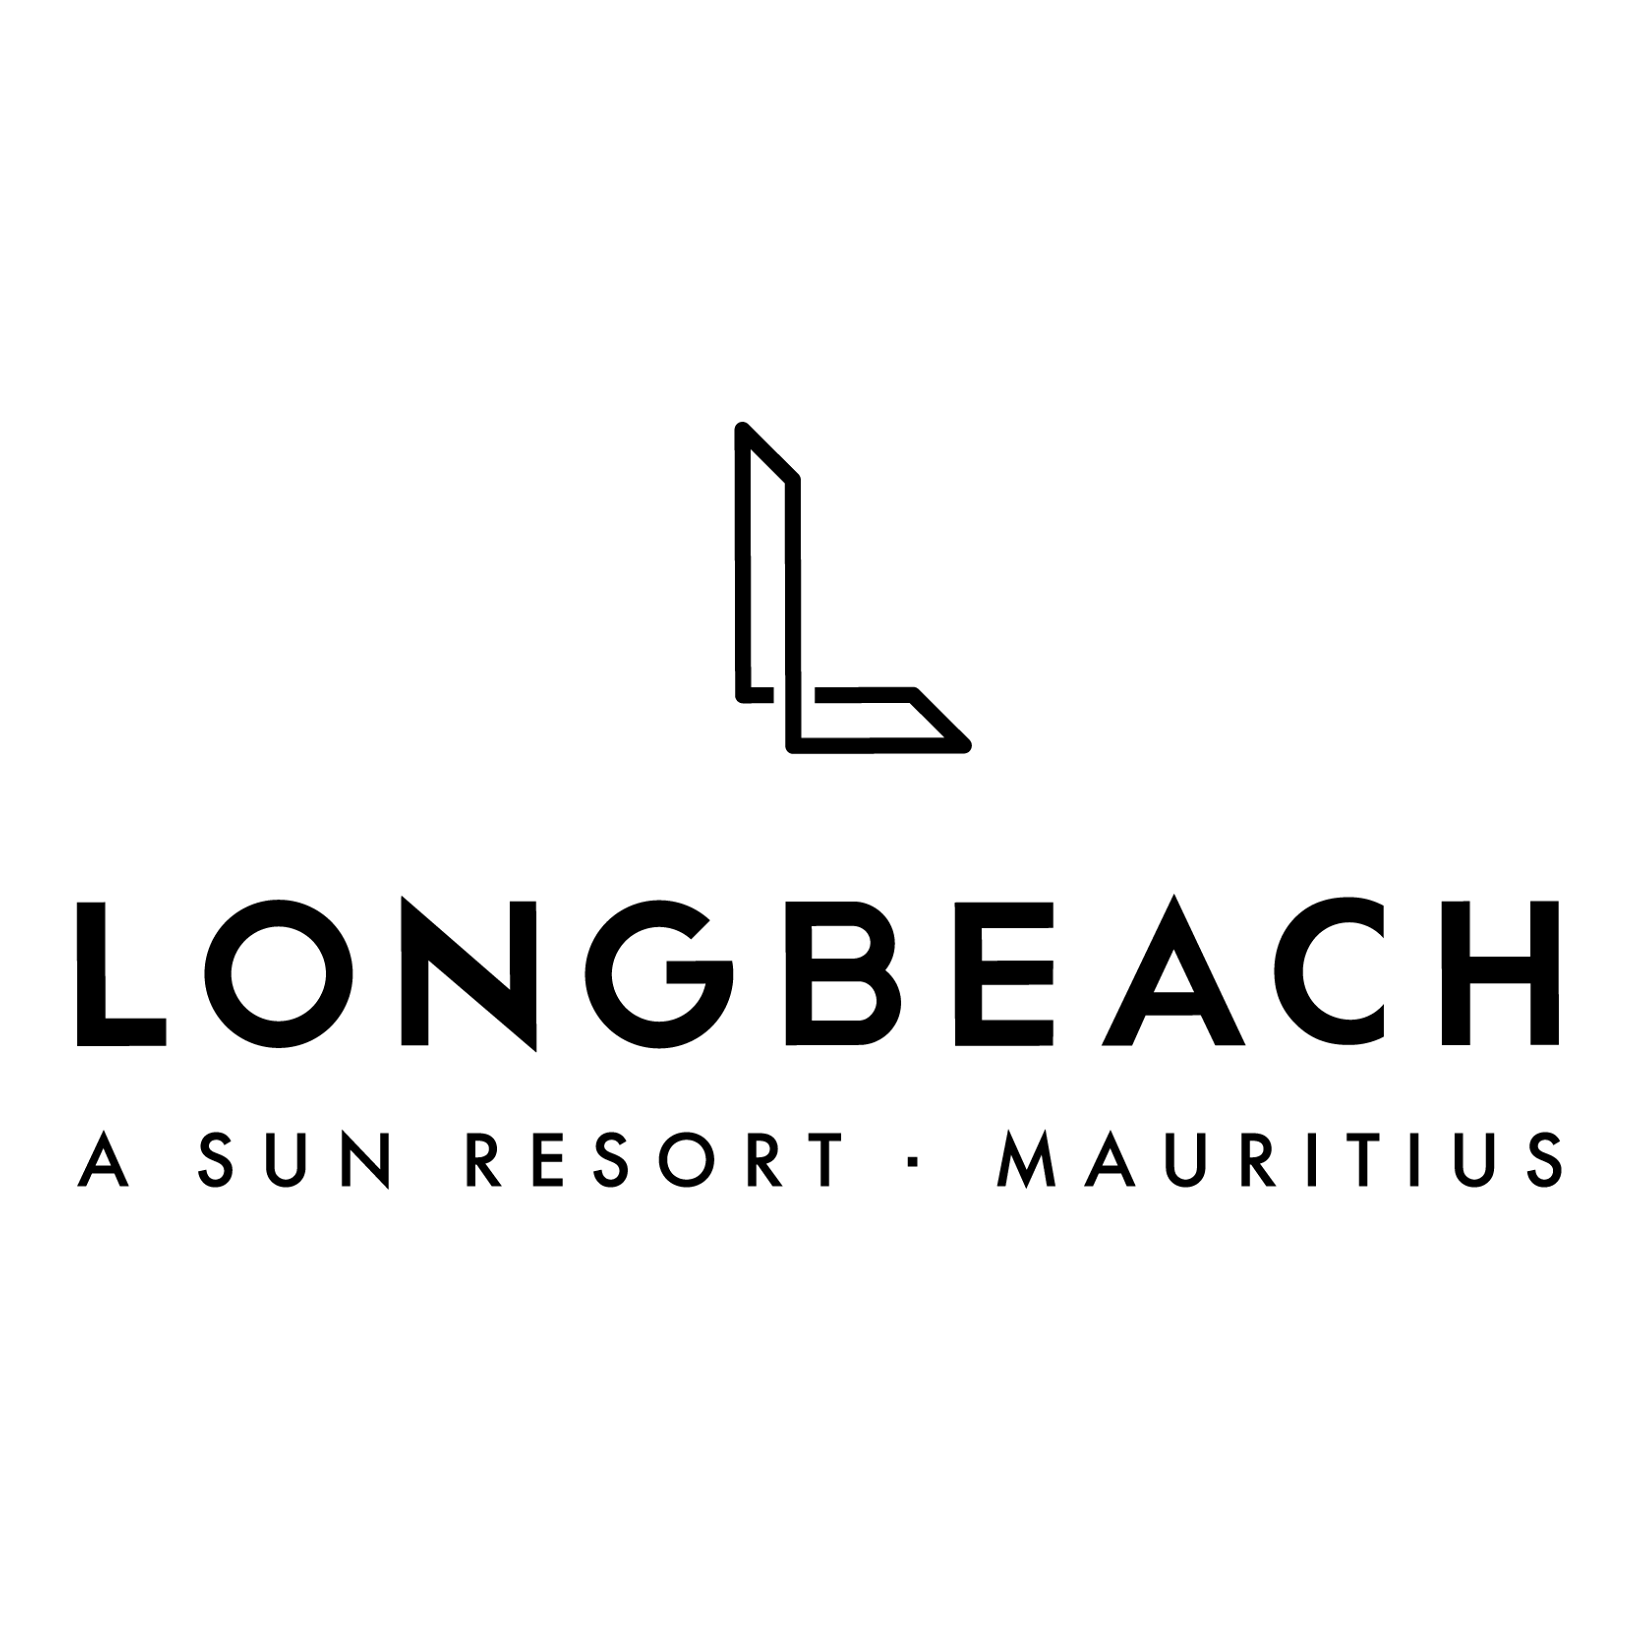 Image result for Long Beach, A Sun Resort, Mauritius